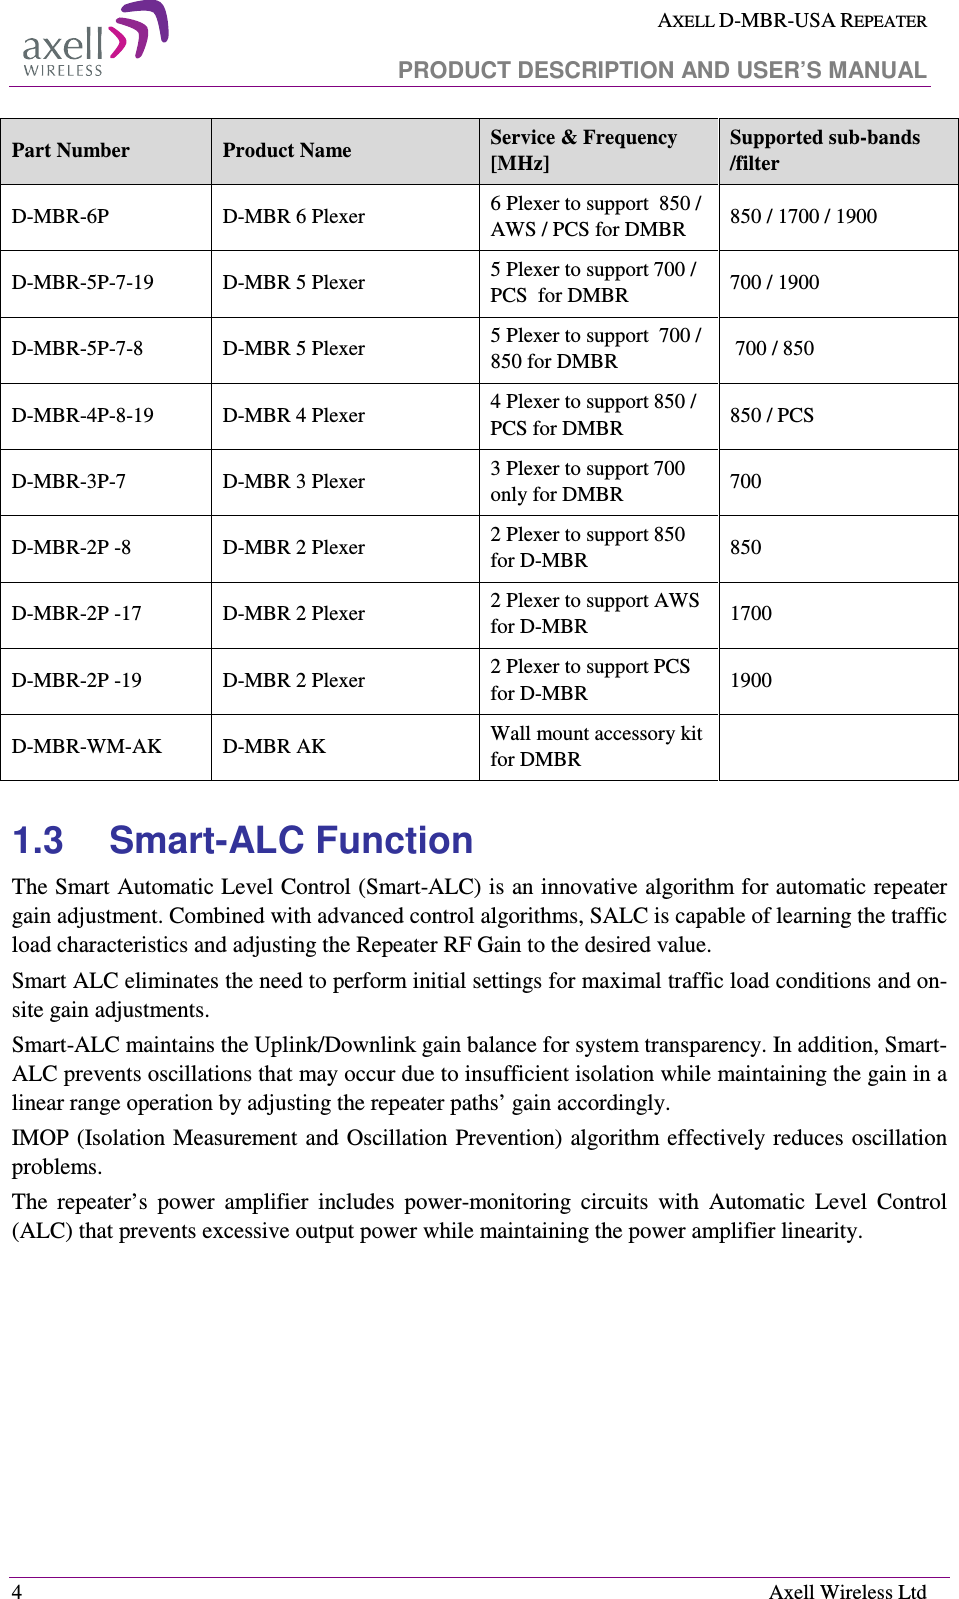  AXELL D-MBR-USA REPEATER   PRODUCT DESCRIPTION AND USER’S MANUAL  4    Axell Wireless Ltd Part Number  Product Name  Service &amp; Frequency [MHz] Supported sub-bands  /filter D-MBR-6P  D-MBR 6 Plexer  6 Plexer to support  850 / AWS / PCS for DMBR  850 / 1700 / 1900 D-MBR-5P-7-19  D-MBR 5 Plexer  5 Plexer to support 700 / PCS  for DMBR  700 / 1900  D-MBR-5P-7-8  D-MBR 5 Plexer  5 Plexer to support  700 / 850 for DMBR   700 / 850 D-MBR-4P-8-19  D-MBR 4 Plexer  4 Plexer to support 850 / PCS for DMBR  850 / PCS D-MBR-3P-7  D-MBR 3 Plexer  3 Plexer to support 700 only for DMBR  700 D-MBR-2P -8  D-MBR 2 Plexer  2 Plexer to support 850 for D-MBR  850 D-MBR-2P -17  D-MBR 2 Plexer  2 Plexer to support AWS for D-MBR  1700 D-MBR-2P -19  D-MBR 2 Plexer  2 Plexer to support PCS for D-MBR  1900 D-MBR-WM-AK  D-MBR AK  Wall mount accessory kit for DMBR    1.3  Smart-ALC Function The Smart Automatic Level Control (Smart-ALC) is an innovative algorithm for automatic repeater gain adjustment. Combined with advanced control algorithms, SALC is capable of learning the traffic load characteristics and adjusting the Repeater RF Gain to the desired value.  Smart ALC eliminates the need to perform initial settings for maximal traffic load conditions and on-site gain adjustments. Smart-ALC maintains the Uplink/Downlink gain balance for system transparency. In addition, Smart-ALC prevents oscillations that may occur due to insufficient isolation while maintaining the gain in a linear range operation by adjusting the repeater paths’ gain accordingly.  IMOP (Isolation Measurement and  Oscillation Prevention) algorithm effectively reduces oscillation problems. The  repeater’s  power  amplifier  includes  power-monitoring  circuits  with  Automatic  Level  Control (ALC) that prevents excessive output power while maintaining the power amplifier linearity.     